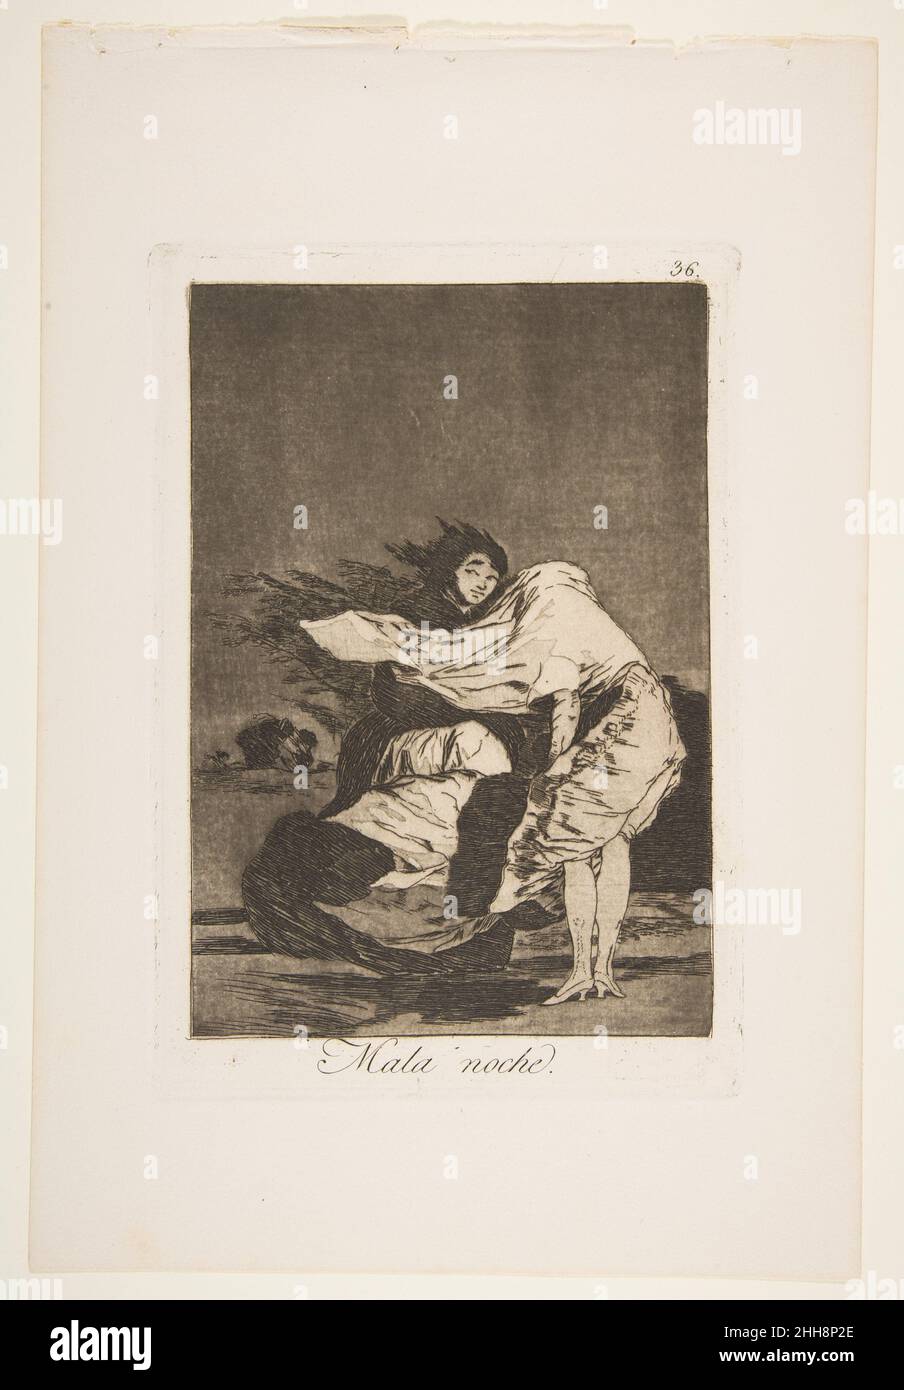 Plate 36 from 'Los Caprichos': A bad night (Mala noche.) 1881–86 Goya (Francisco de Goya y Lucientes) Spanish. Plate 36 from 'Los Caprichos': A bad night (Mala noche.)  380473 Artist: Goya (Francisco de Goya y Lucientes), Spanish, Fuendetodos 1746?1828 Bordeaux, Plate 36 from 'Los Caprichos: A bad night (Mala noche.), 1881?86, Etching and burnished aquatint, Plate: 8 7/16 x 6 in. (21.5 x 15.2 cm) Sheet: 12 5/16 ? 8 1/4 in. (31.3 ? 21 cm). The Metropolitan Museum of Art, New York. Gift of Mrs. Grafton H. Pyne, 1951 (51.530.1(36)) Stock Photo